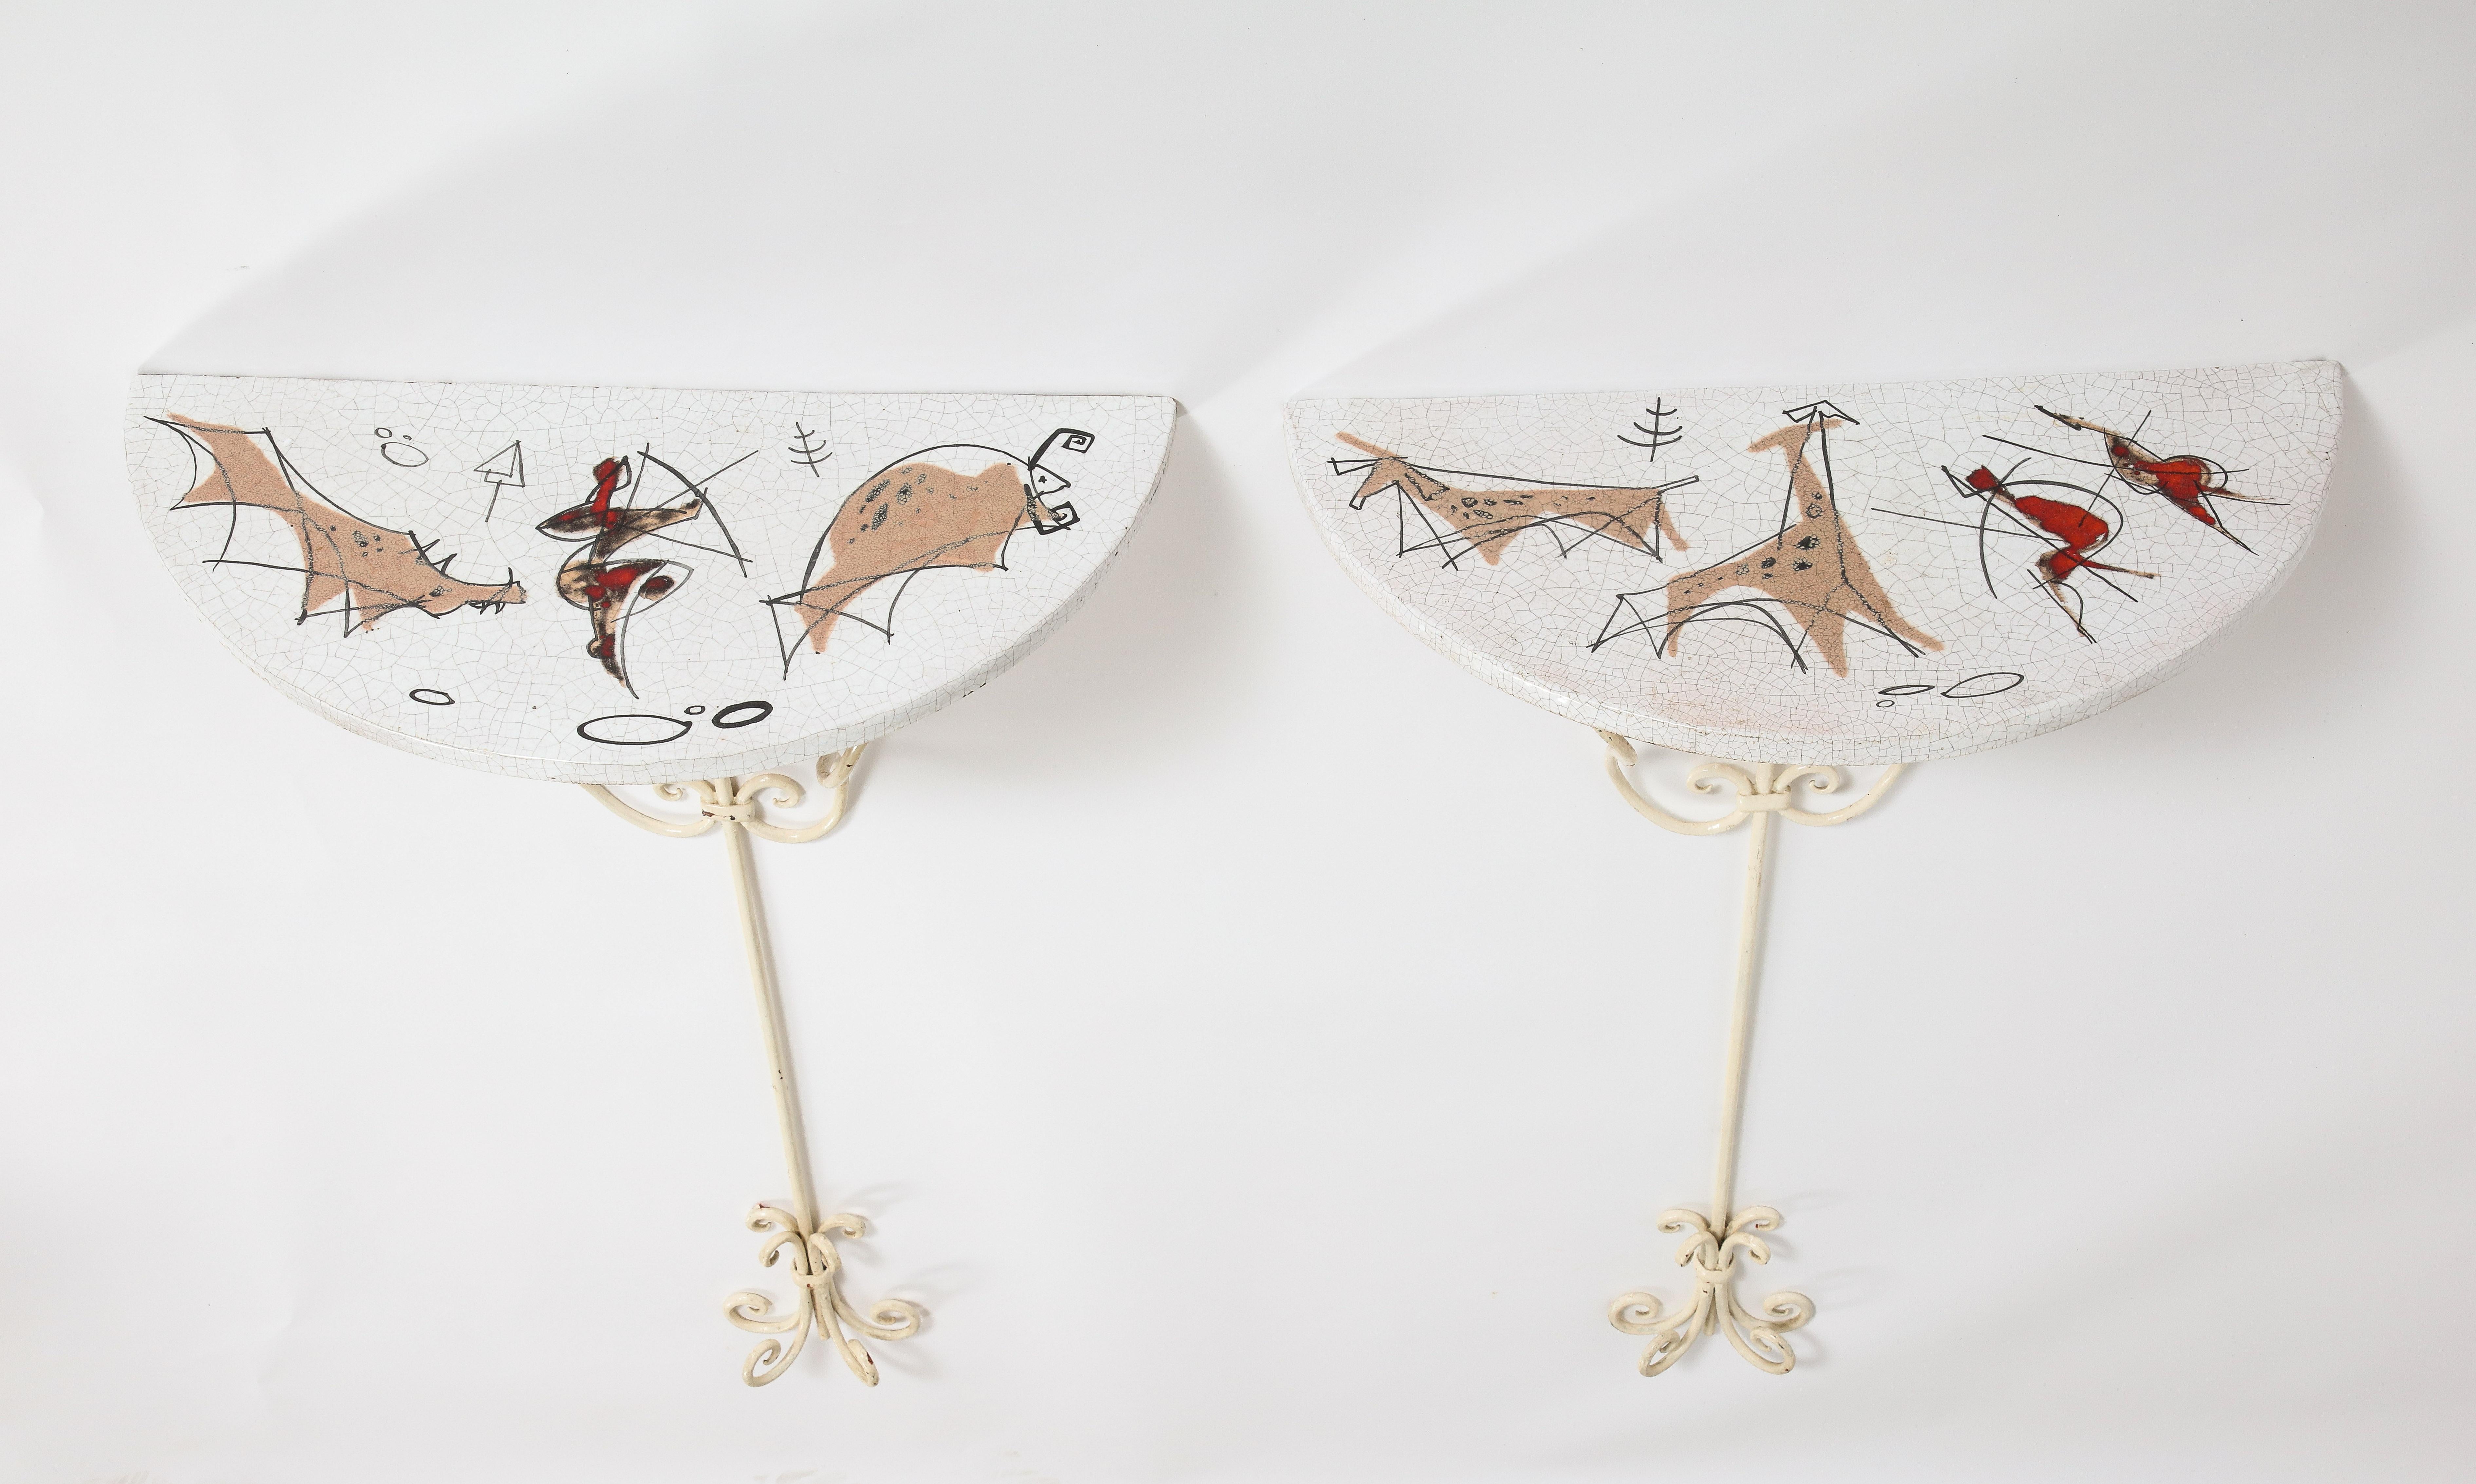 A pair of painted ceramic demi-lune wall consoles, by ceramist and artist Arnaldo Miniati, signed and dated 1959.  
Size: 37 1/4